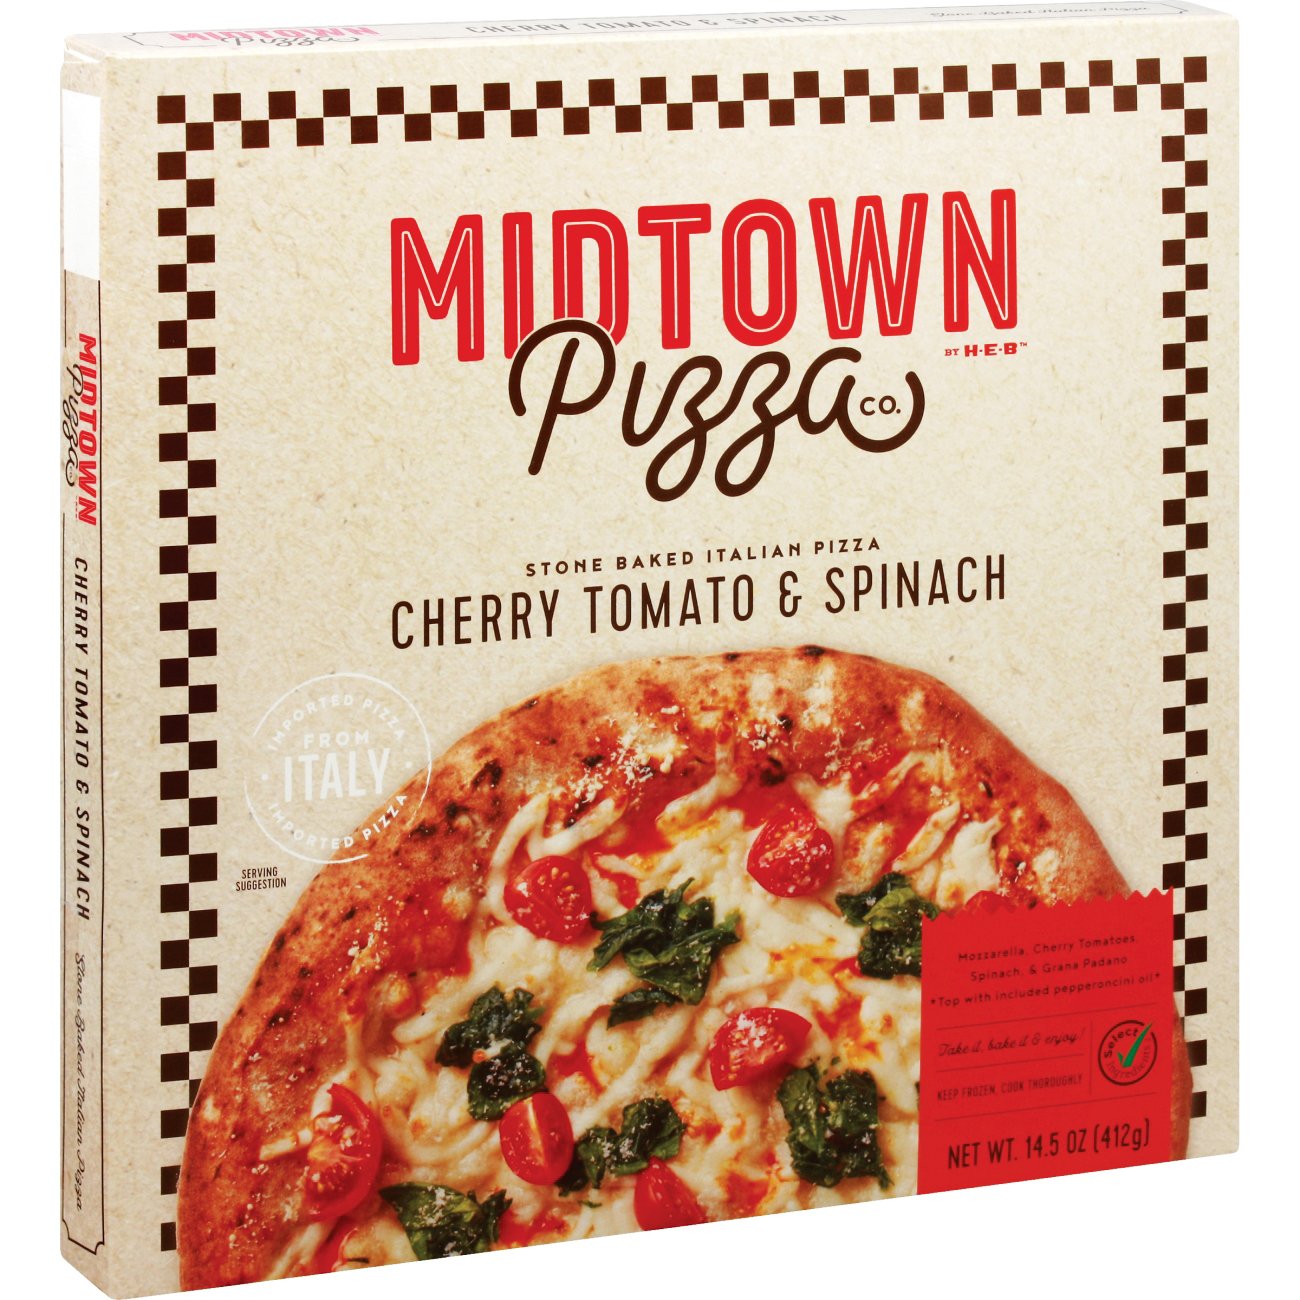 Midtown Pizza Co By Heb Select Ingredients Cherry Tomatoes Spinach Pizza Shop Pizza At Heb